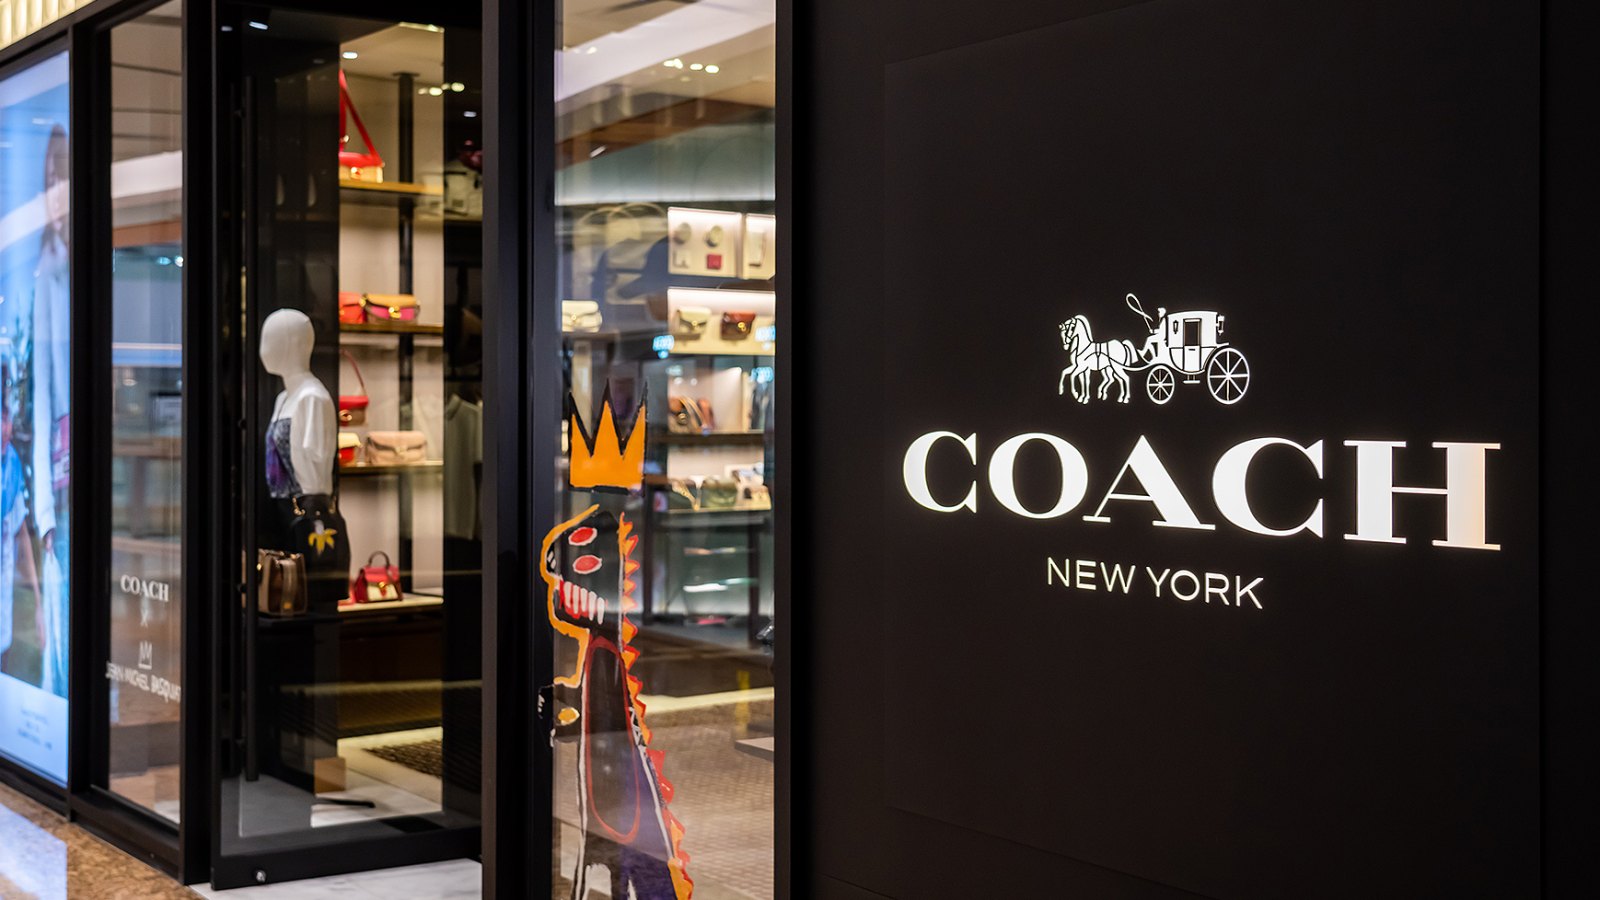 Get summer ready with Coach Outlet purses, phone cases and duffel